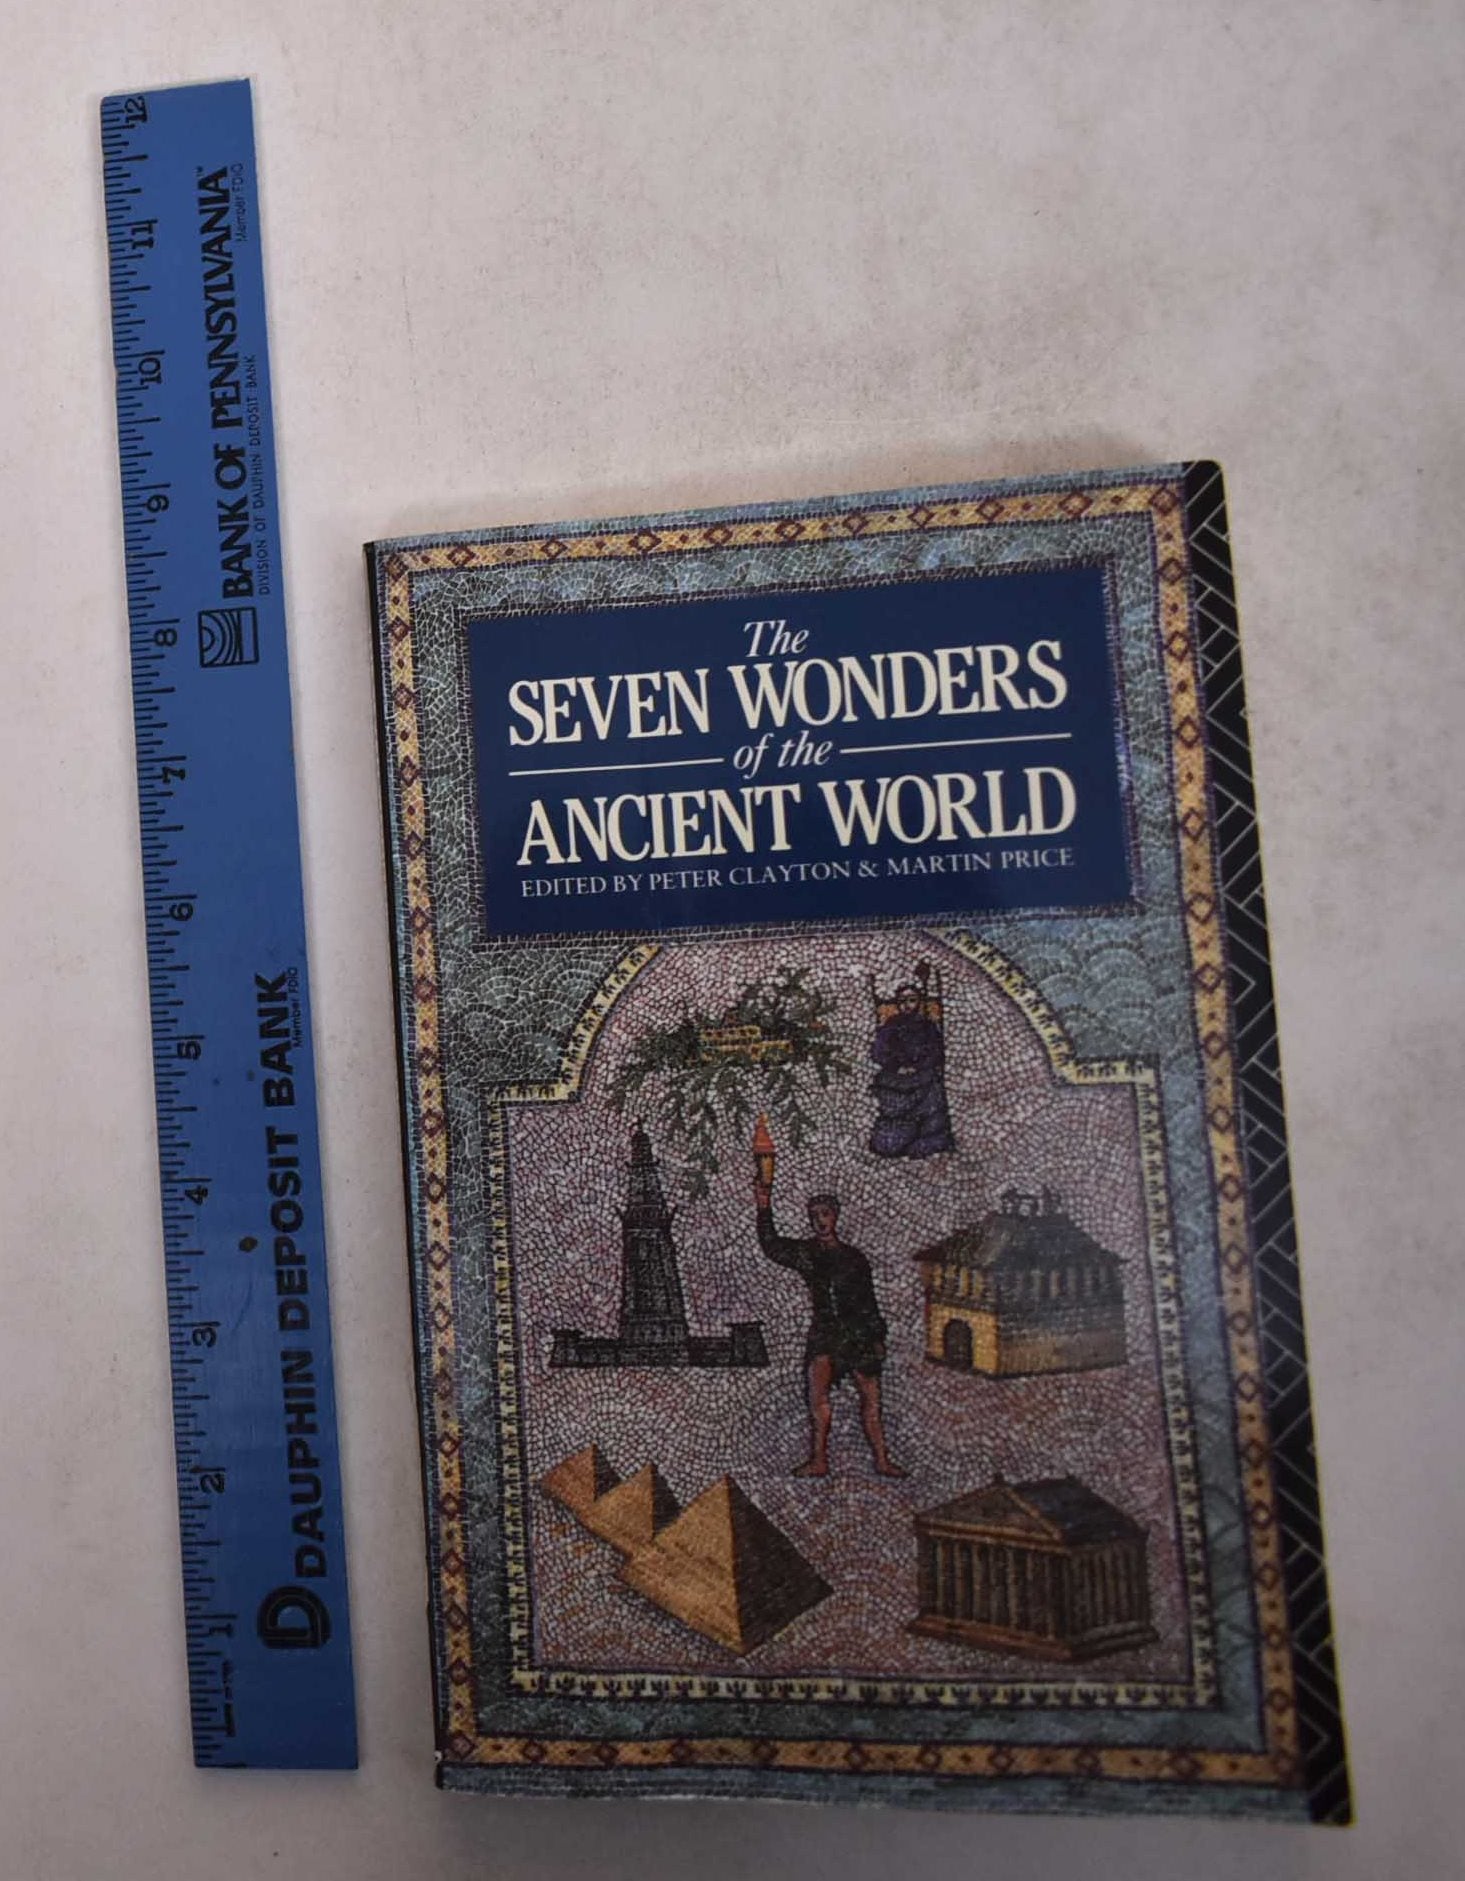 The Seven Wonders of the Ancient World by Peter Clayton, Martin Price on  Mullen Books